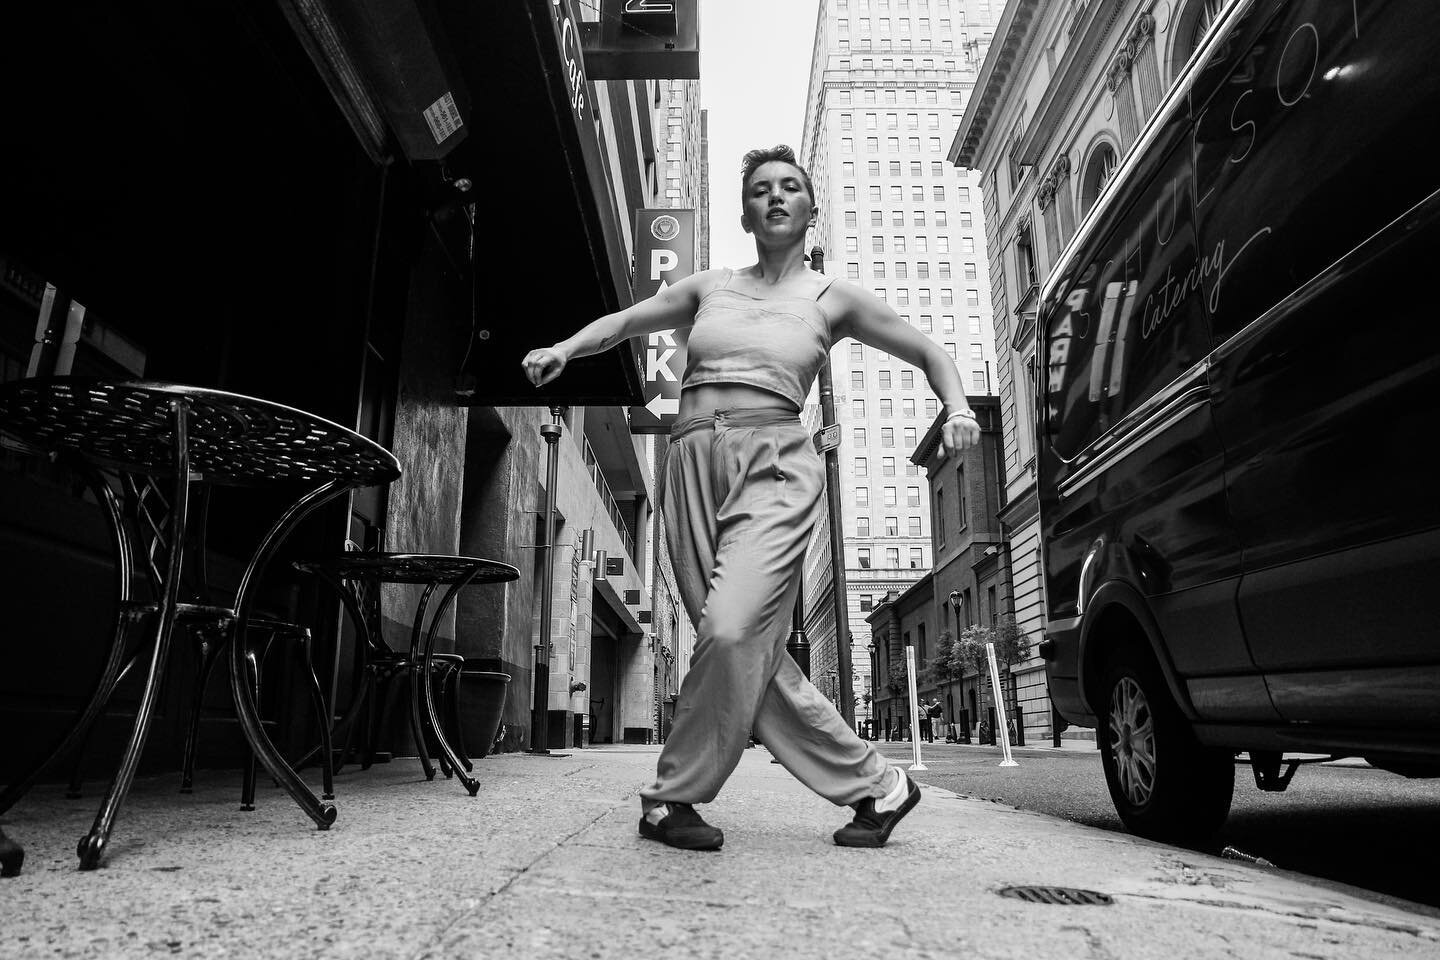 this is what they meant to say when they said &ldquo;Jazz Funk&rdquo;
&hellip;
seeing the city anew thru how 
@pulse_thekidd sees me in it 
&hellip;
check his page for more dancers in philly
&hellip;
#dance #lindyhop #lock #jazz #funk #streetphotogra